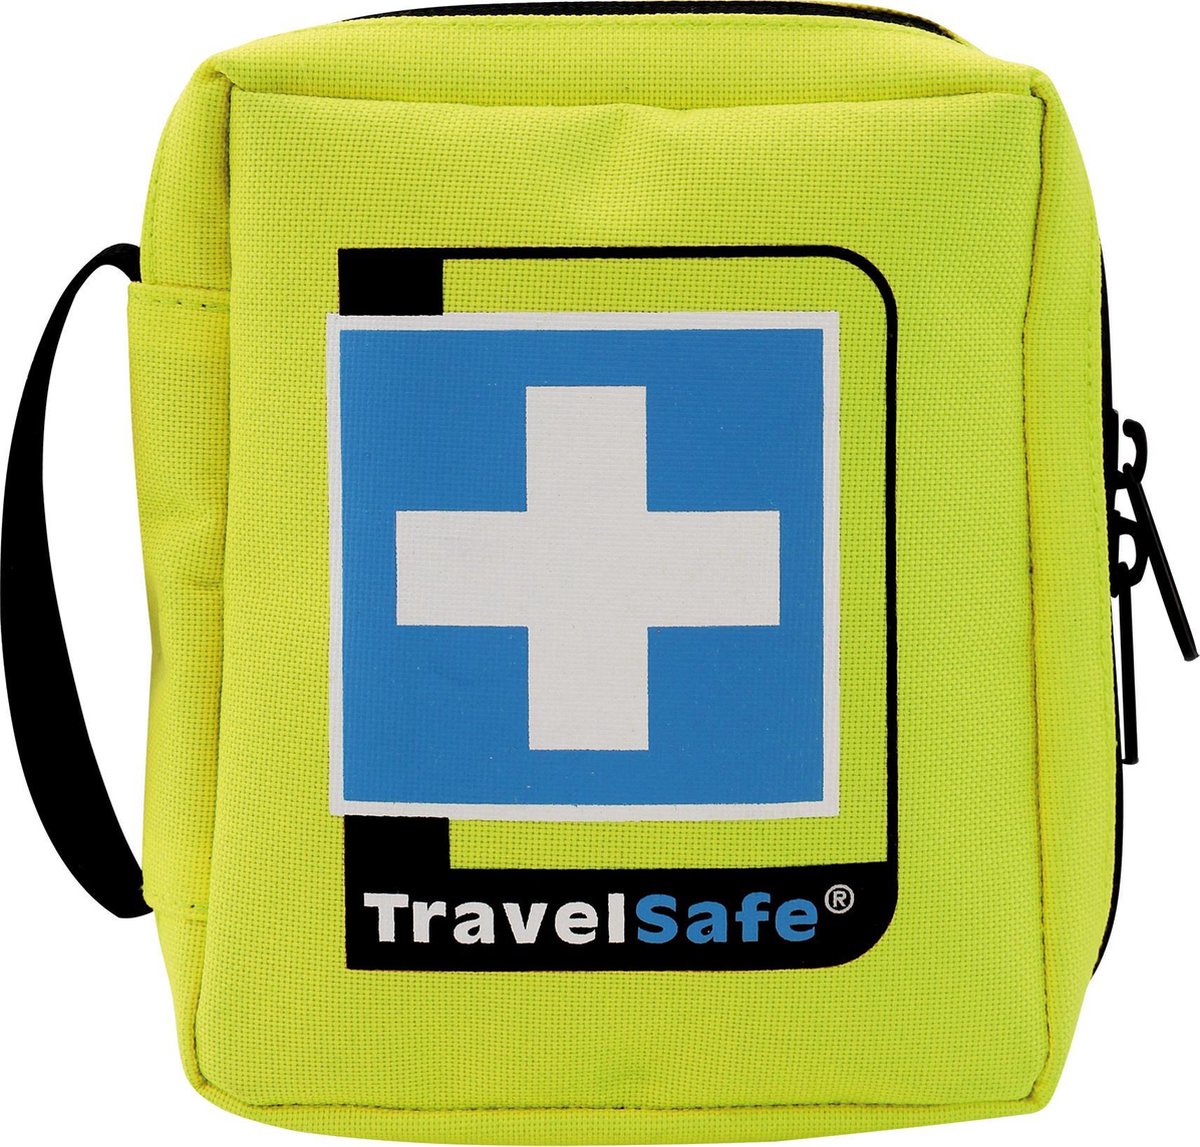 Travelsafe First Aid Kit Globe - Sterile